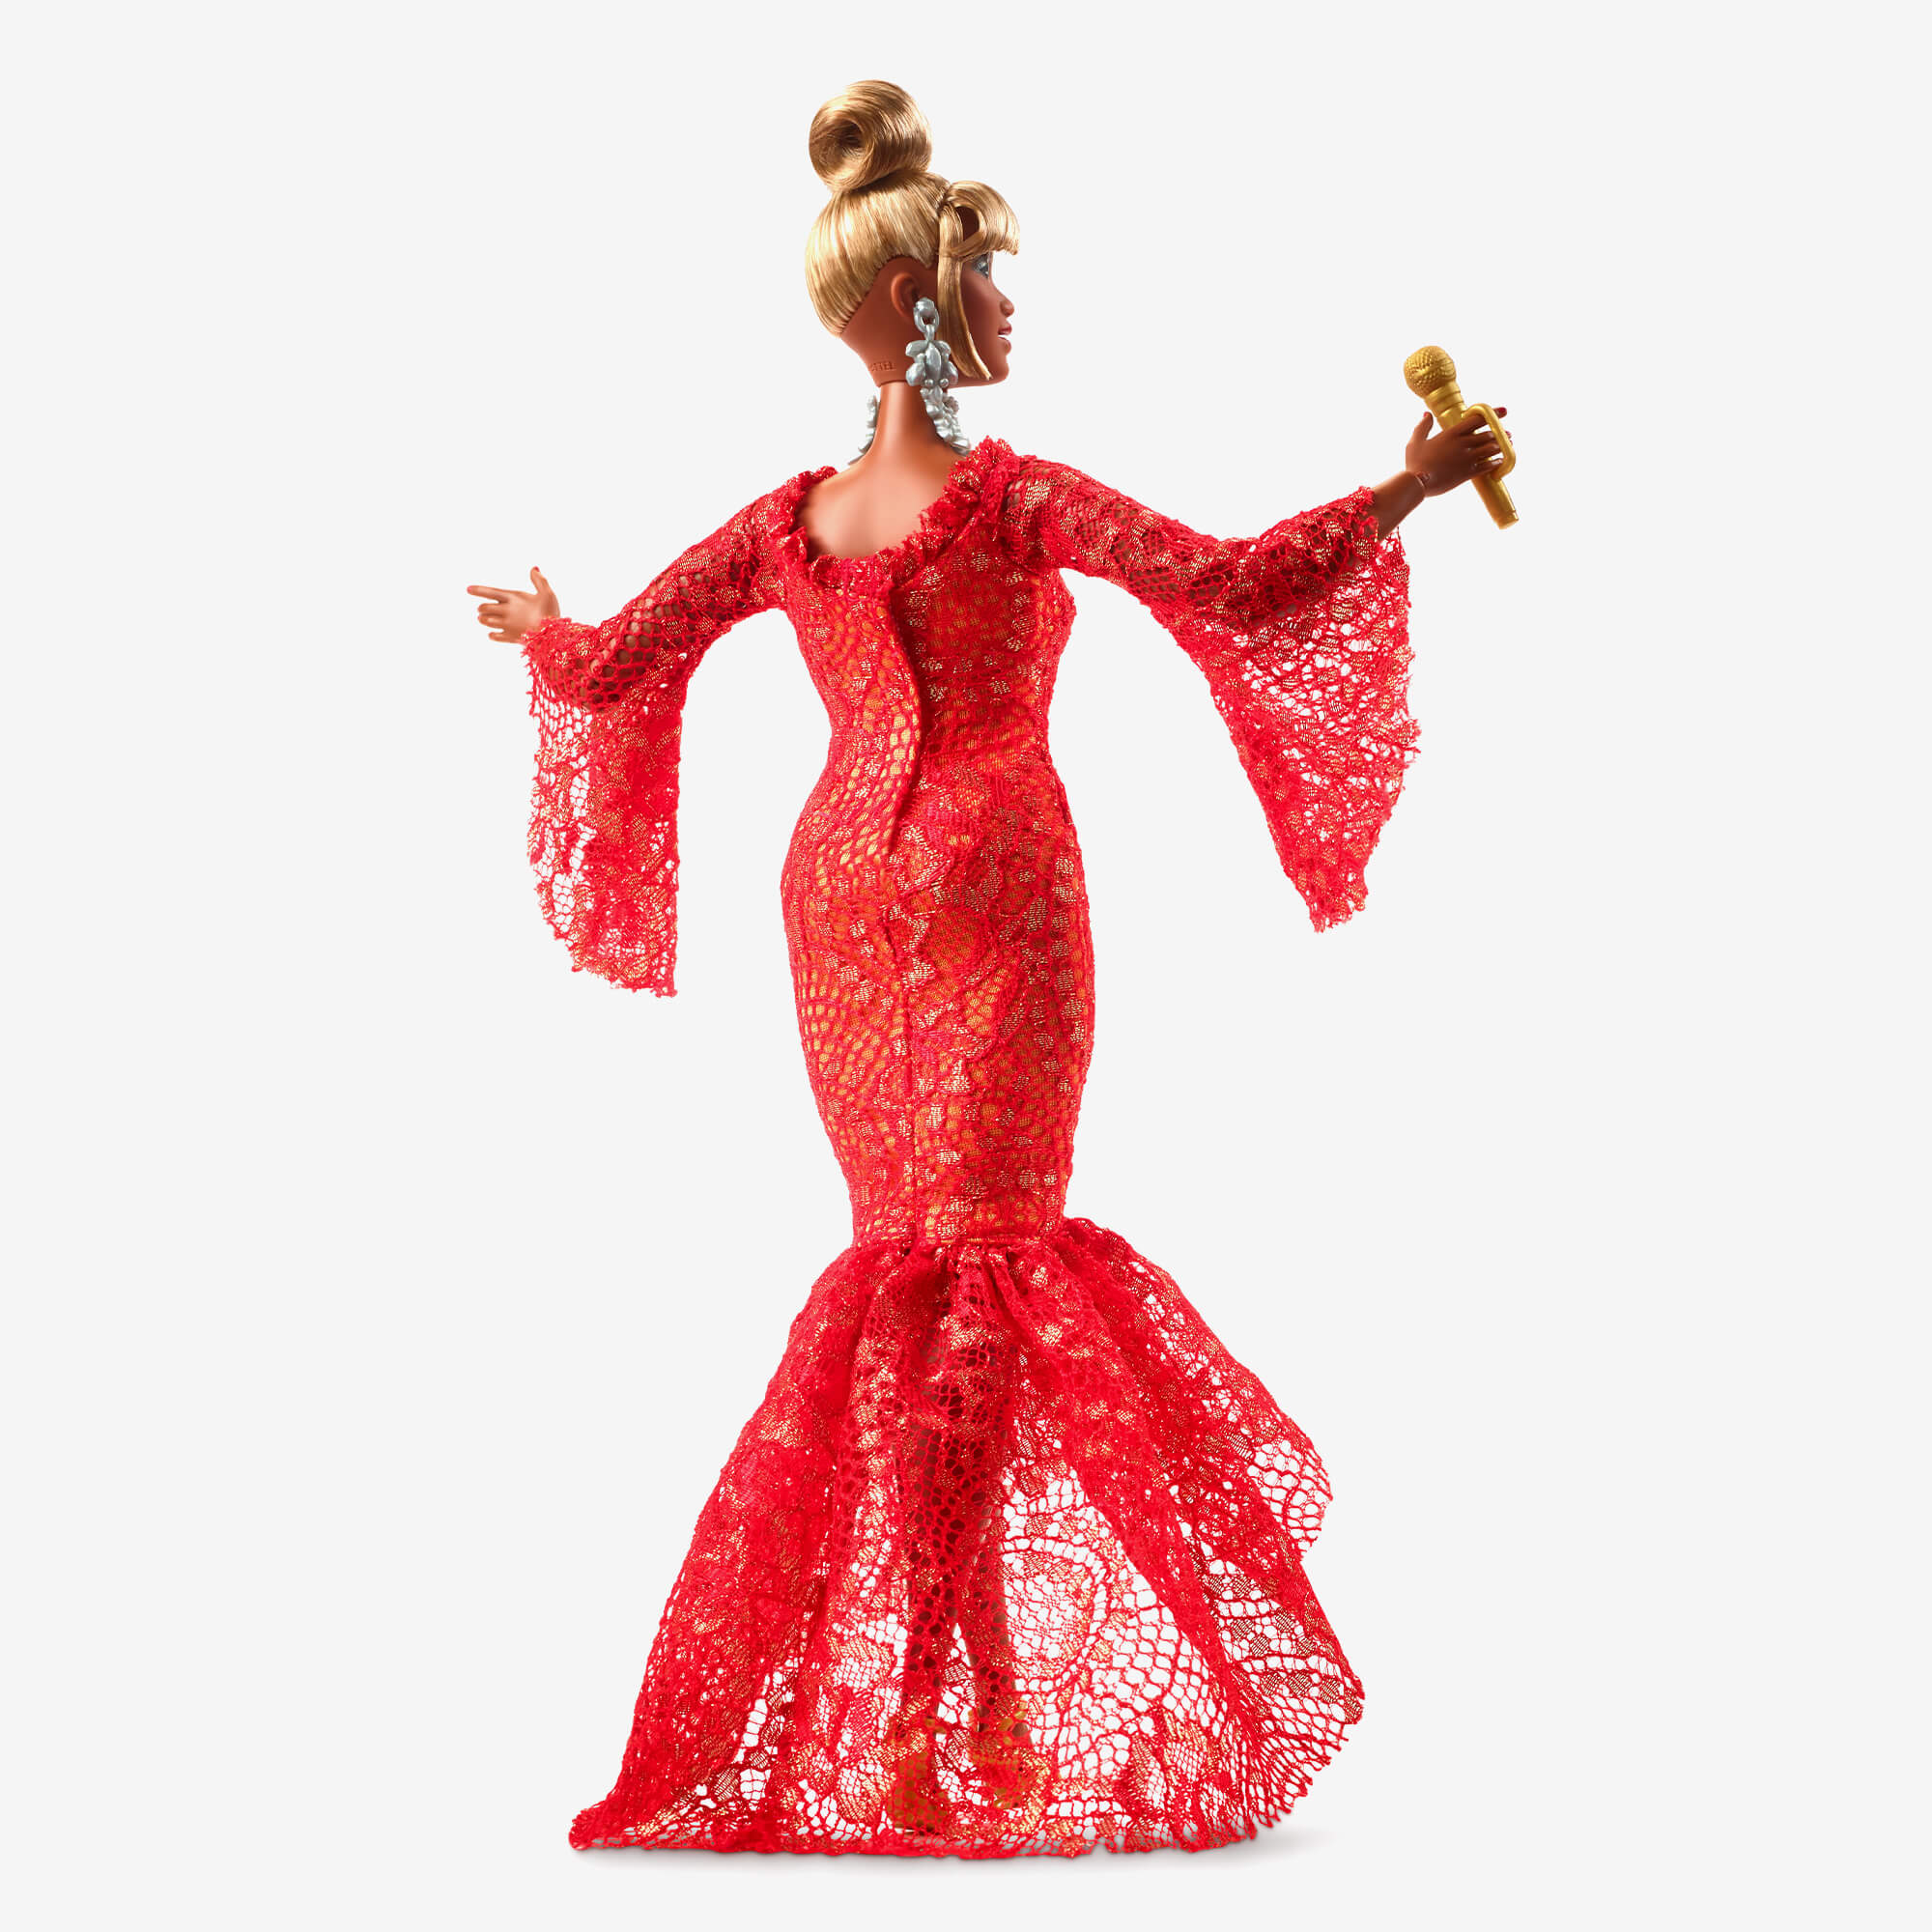 Amazon.com: Barbie Fashion Model Collection Doll, Glam Gown : Toys & Games